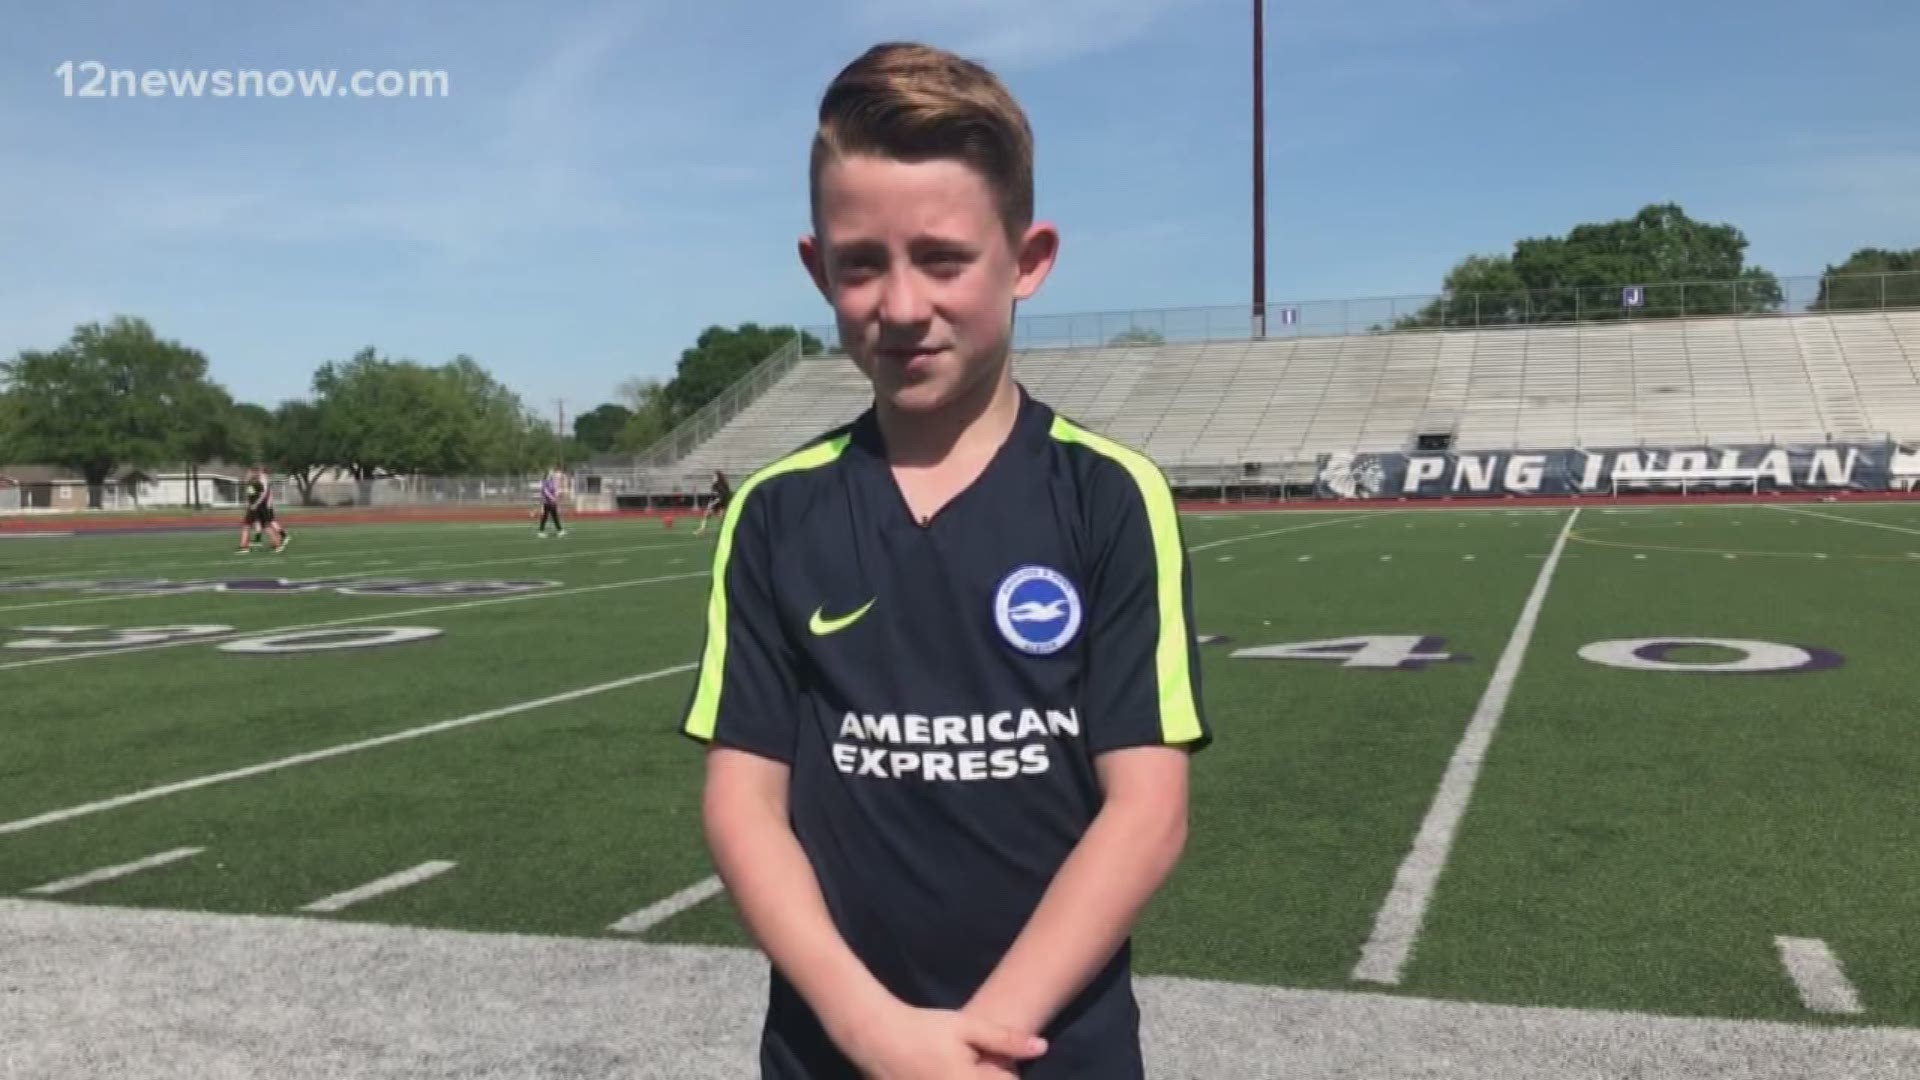 Joshua Hebert will one day play in the English Premier League. But for now, he's a 10-year old boy who gets to visit his father's home town in the Golden Triangle every now and then.